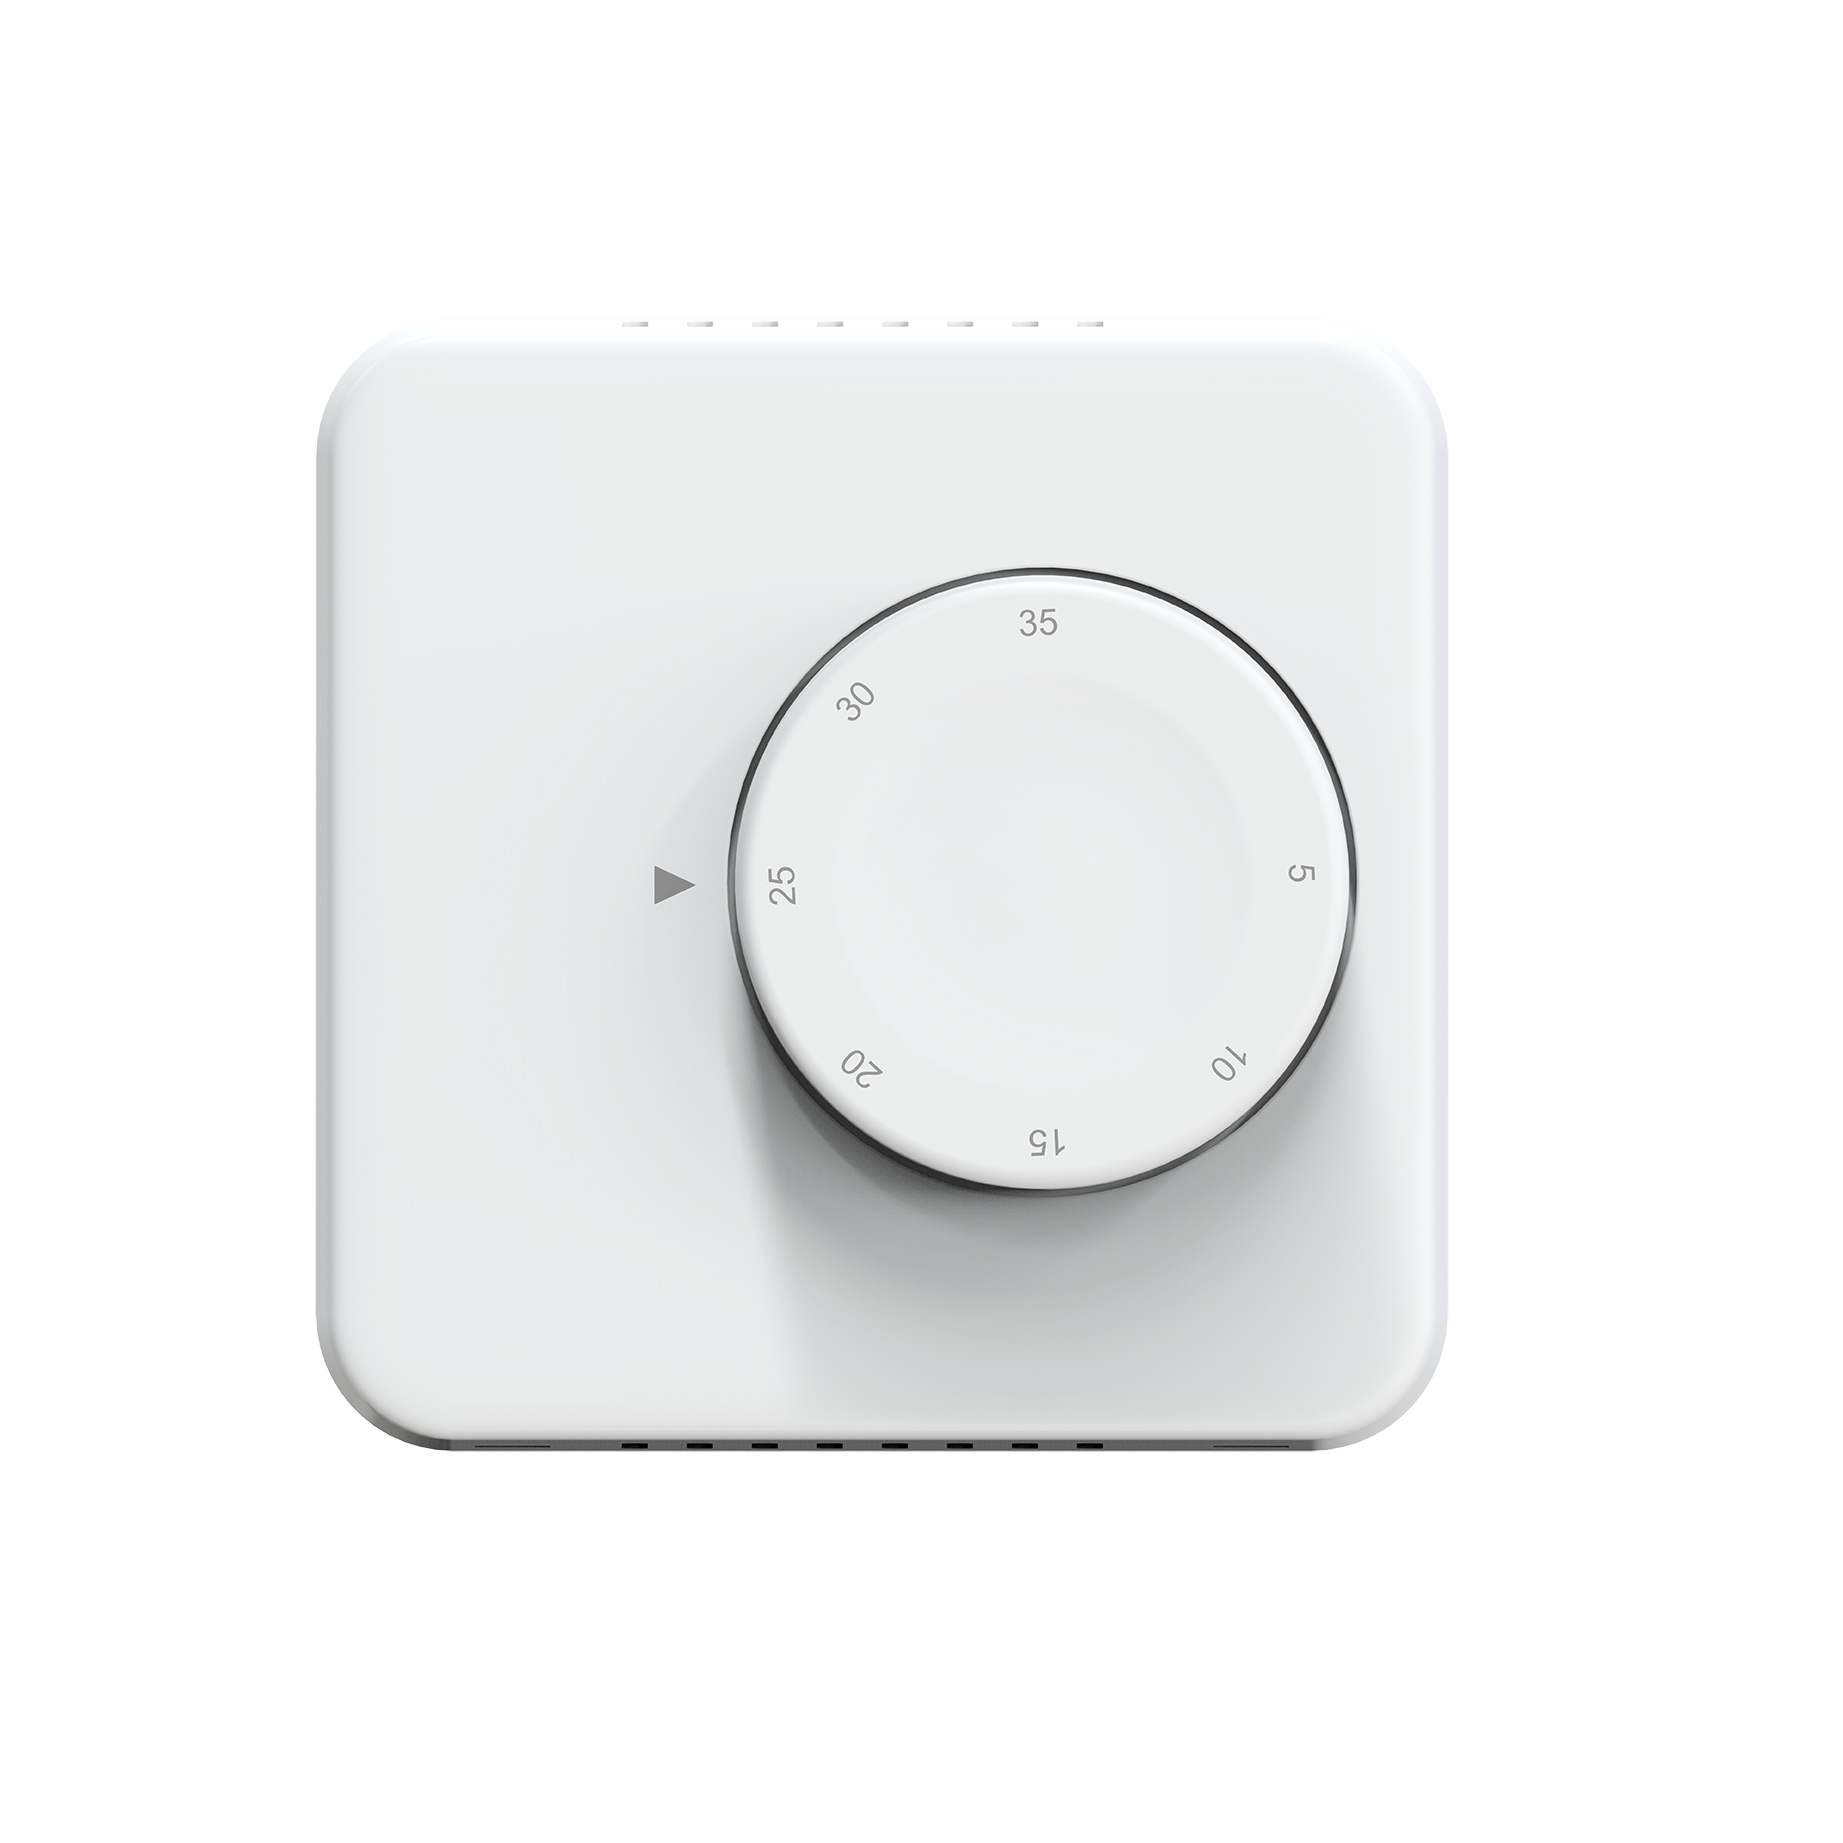 E-TOP mechanical thermostat